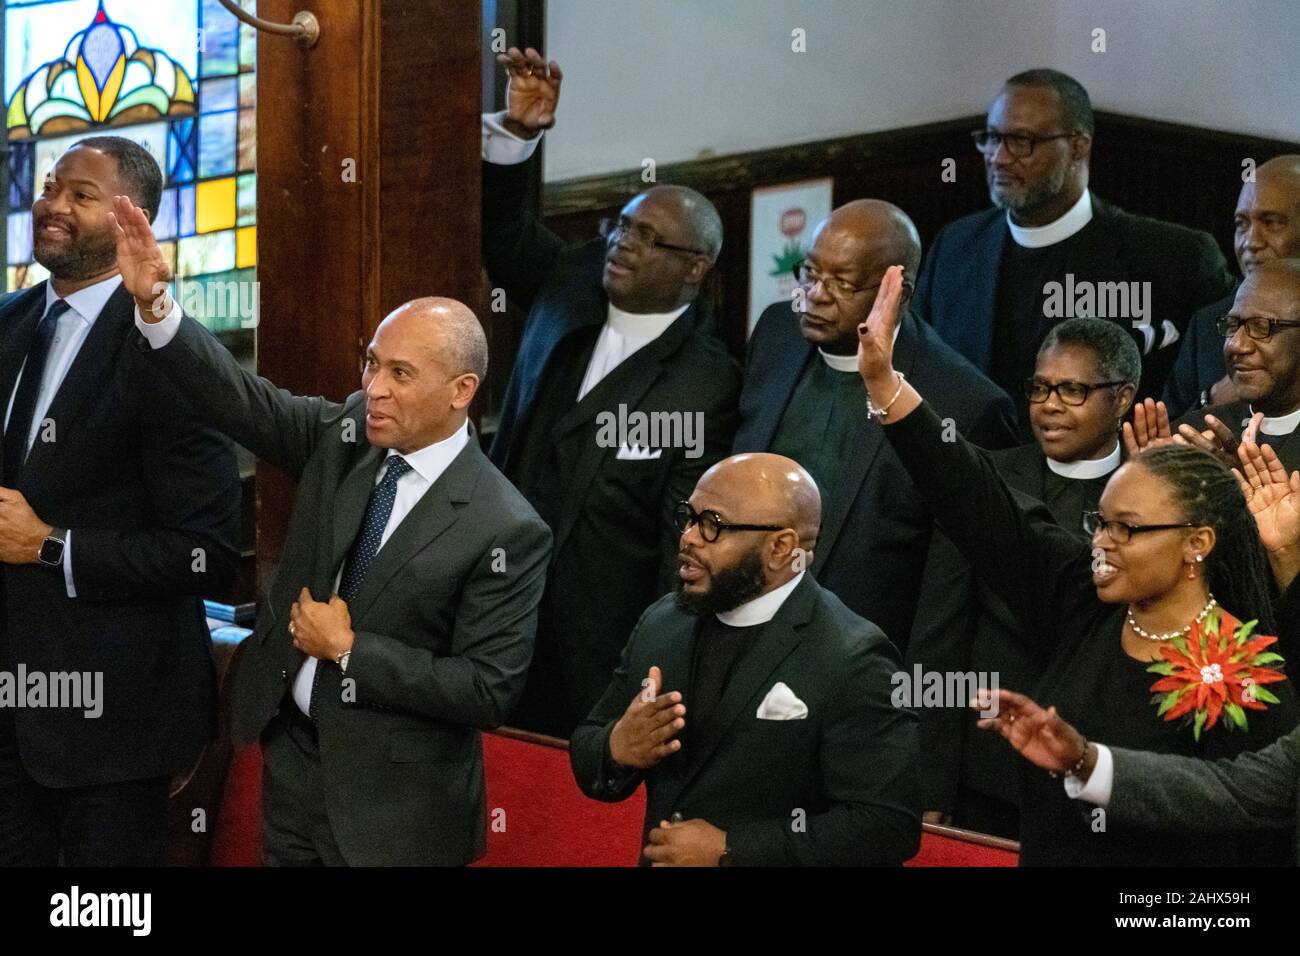 Charleston, United States. 01 January, 2020. Democratic presidential hopeful Gov. Deval Patrick of Massachusetts, left, joins in the worship service at the historic Mother Emanuel AME Church January 1, 2020 in Charleston, South Carolina. The service celebrated Emancipation Day, marking the abolition of slavery in the United States.  Credit: Richard Ellis/Alamy Live News Stock Photo